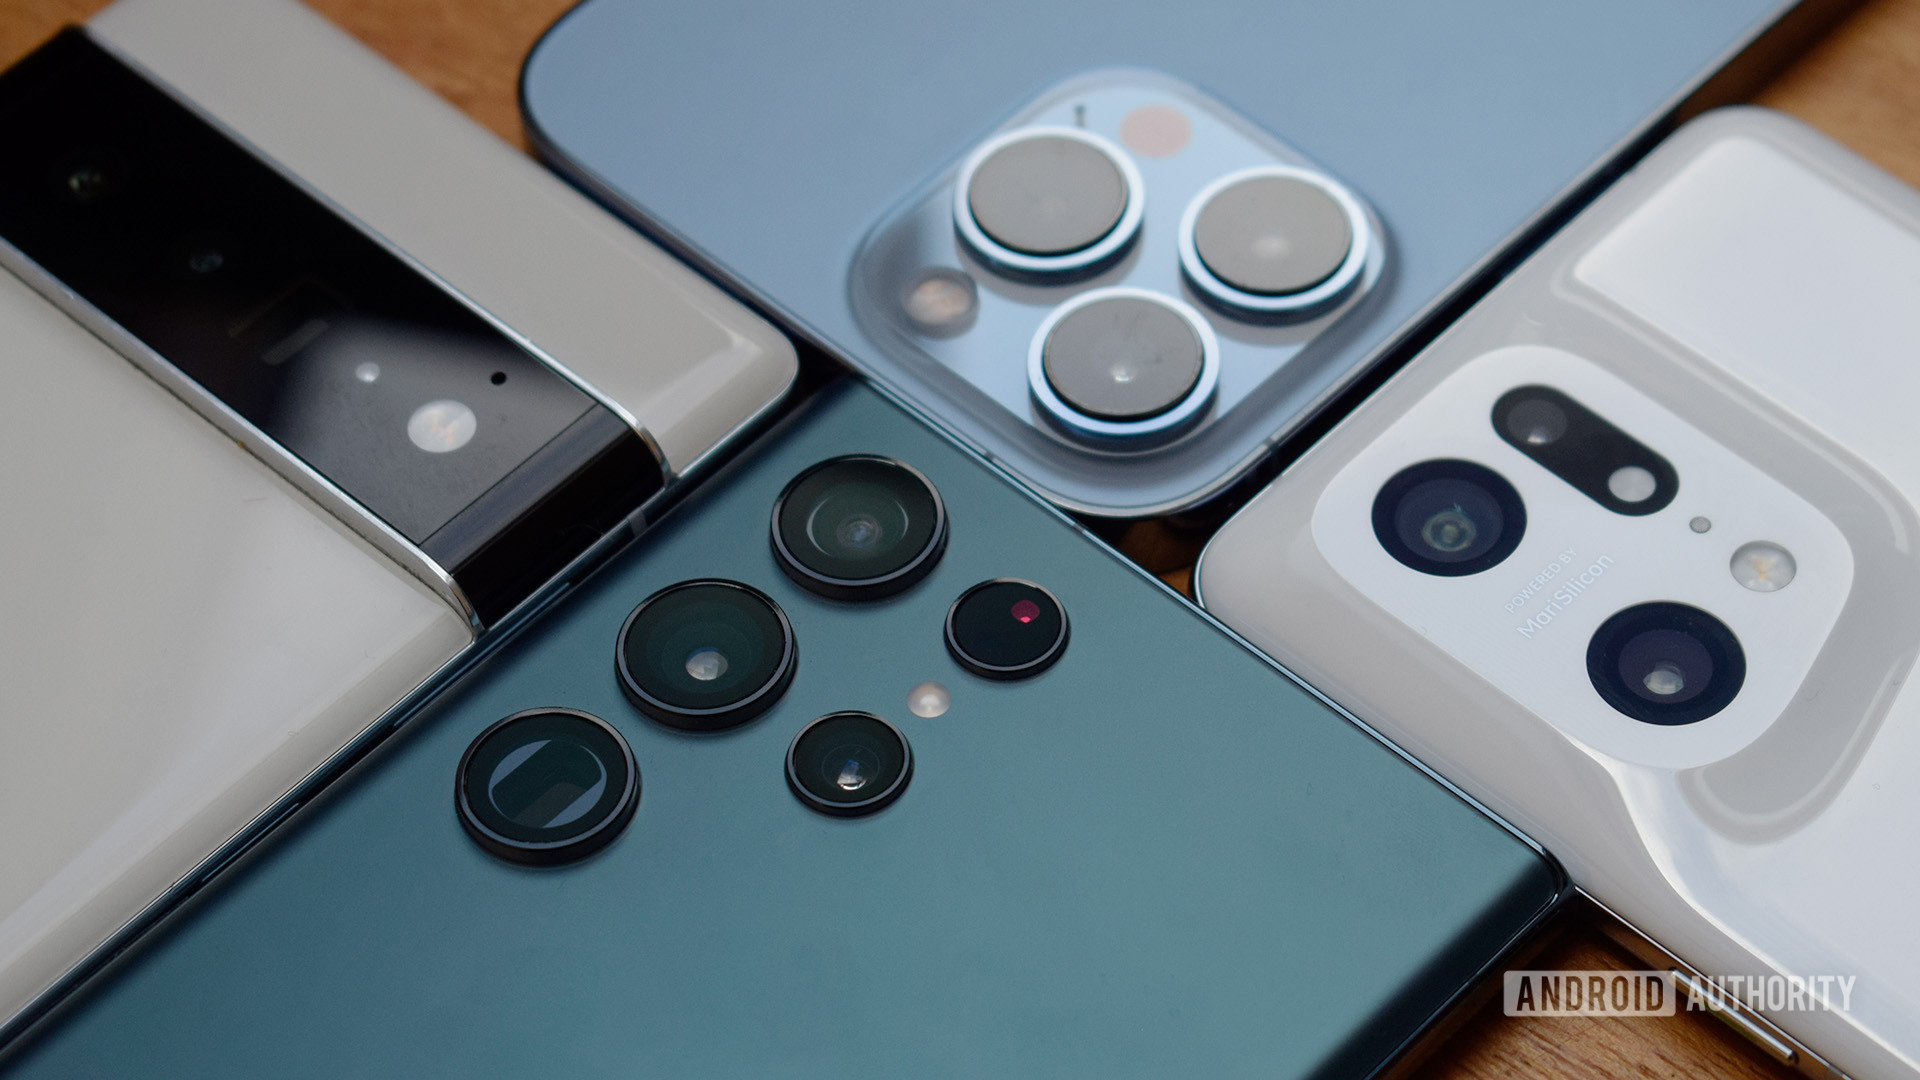 Samsung Galaxy S22 Ultra camera shootout rivals showing the S22 Ultra, iPhone 13 Pro Max, Pixel 6 Pro, and Oppo Find X5 Pro.